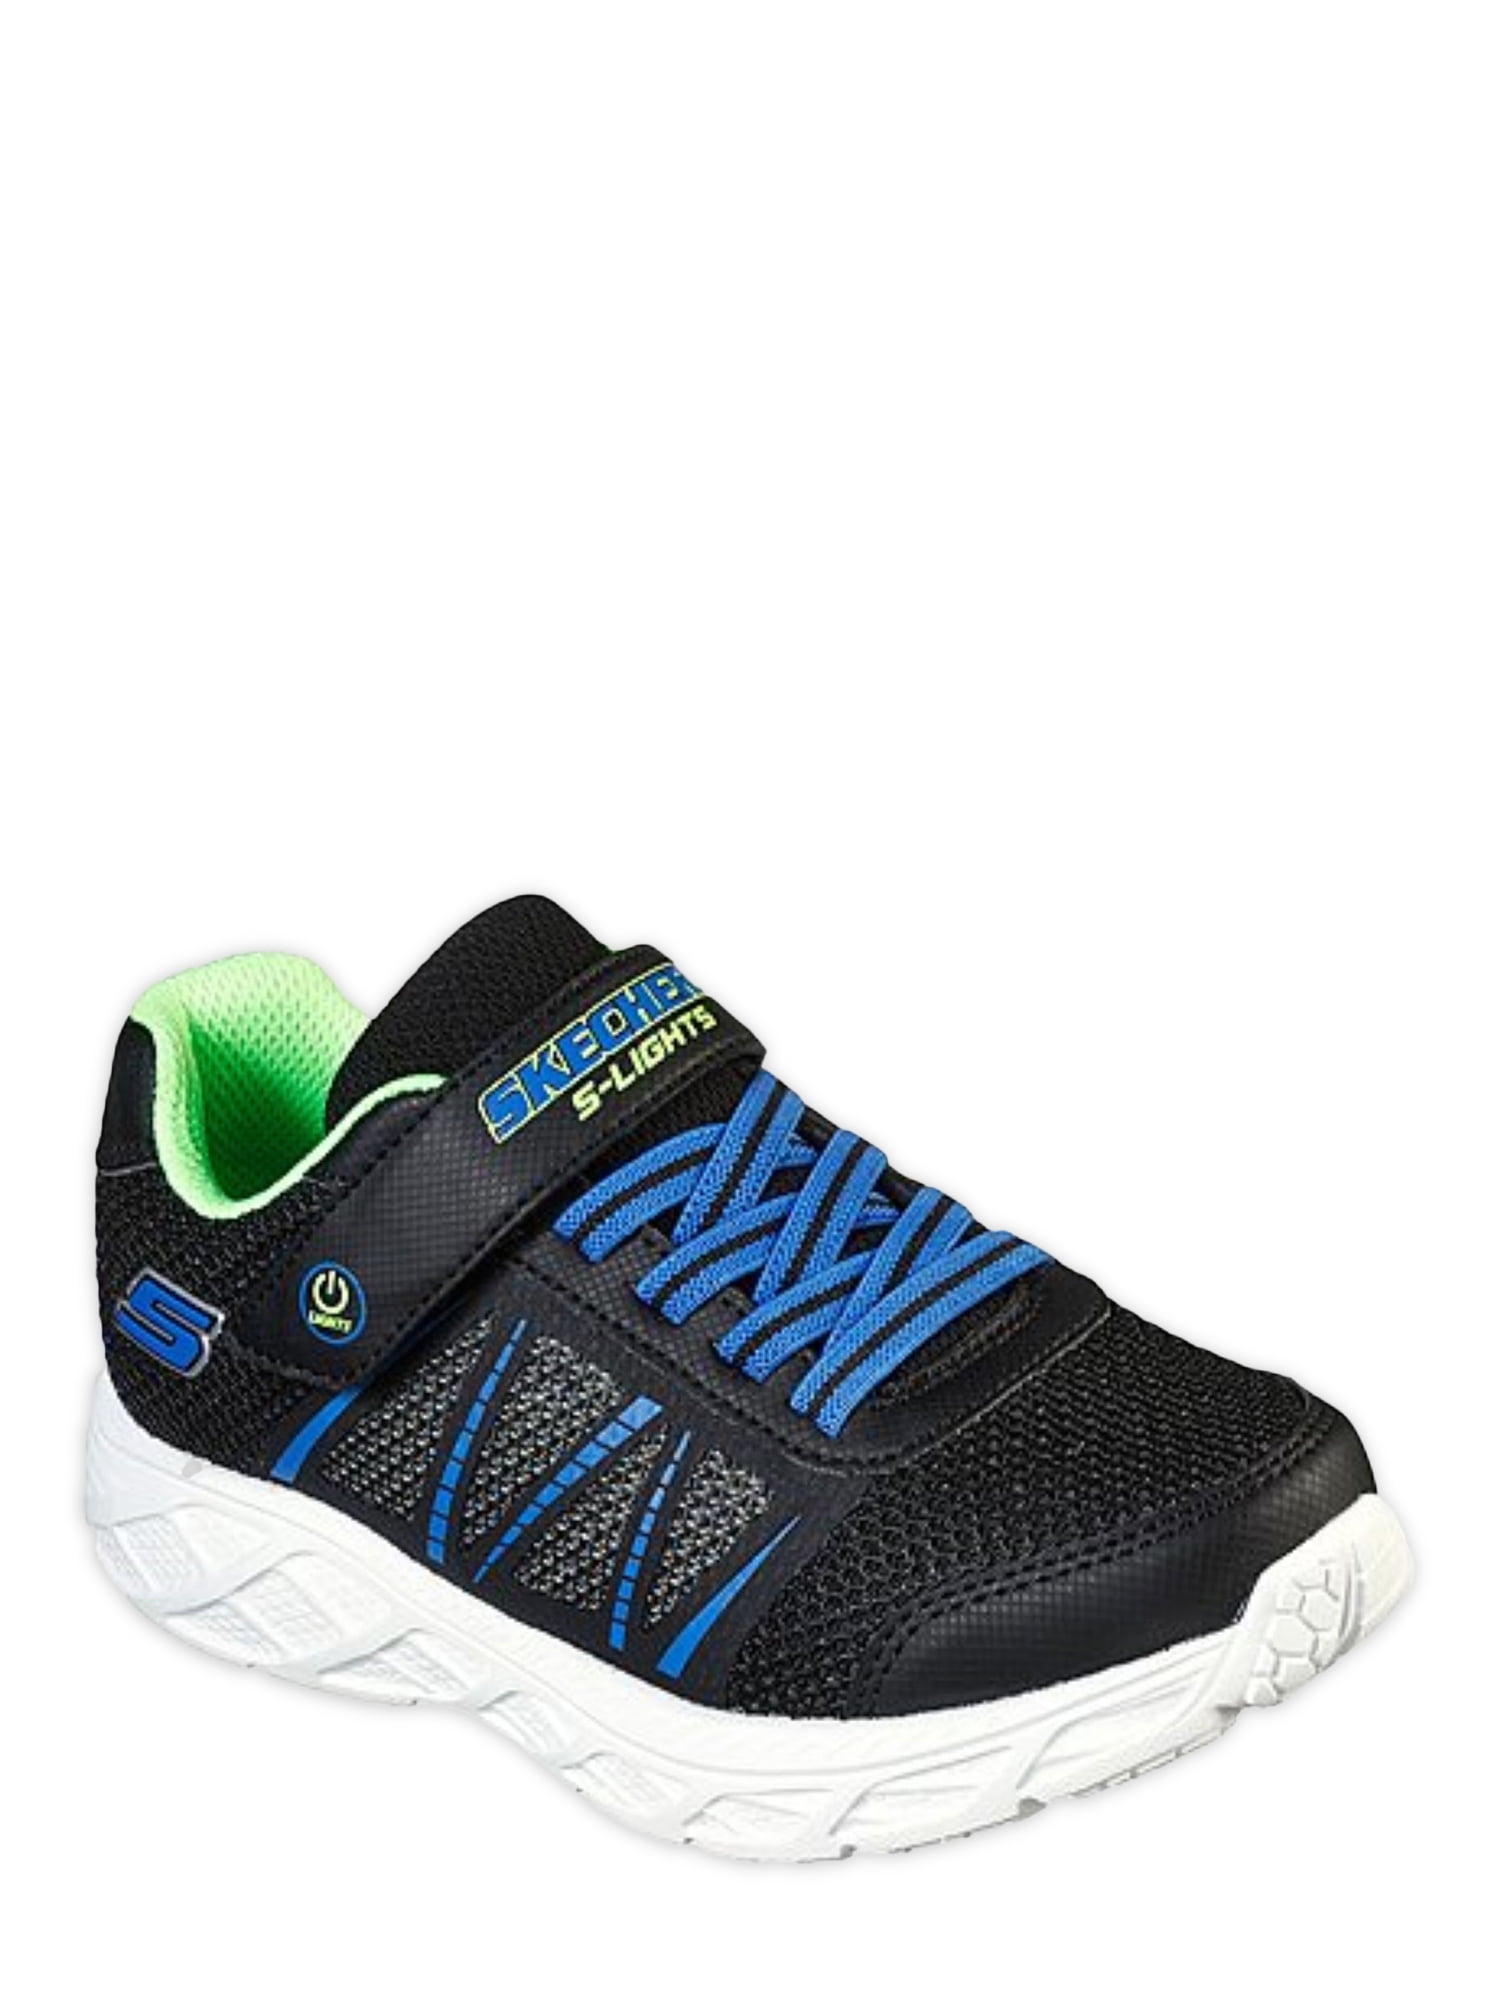 skechers boys athletic shoes